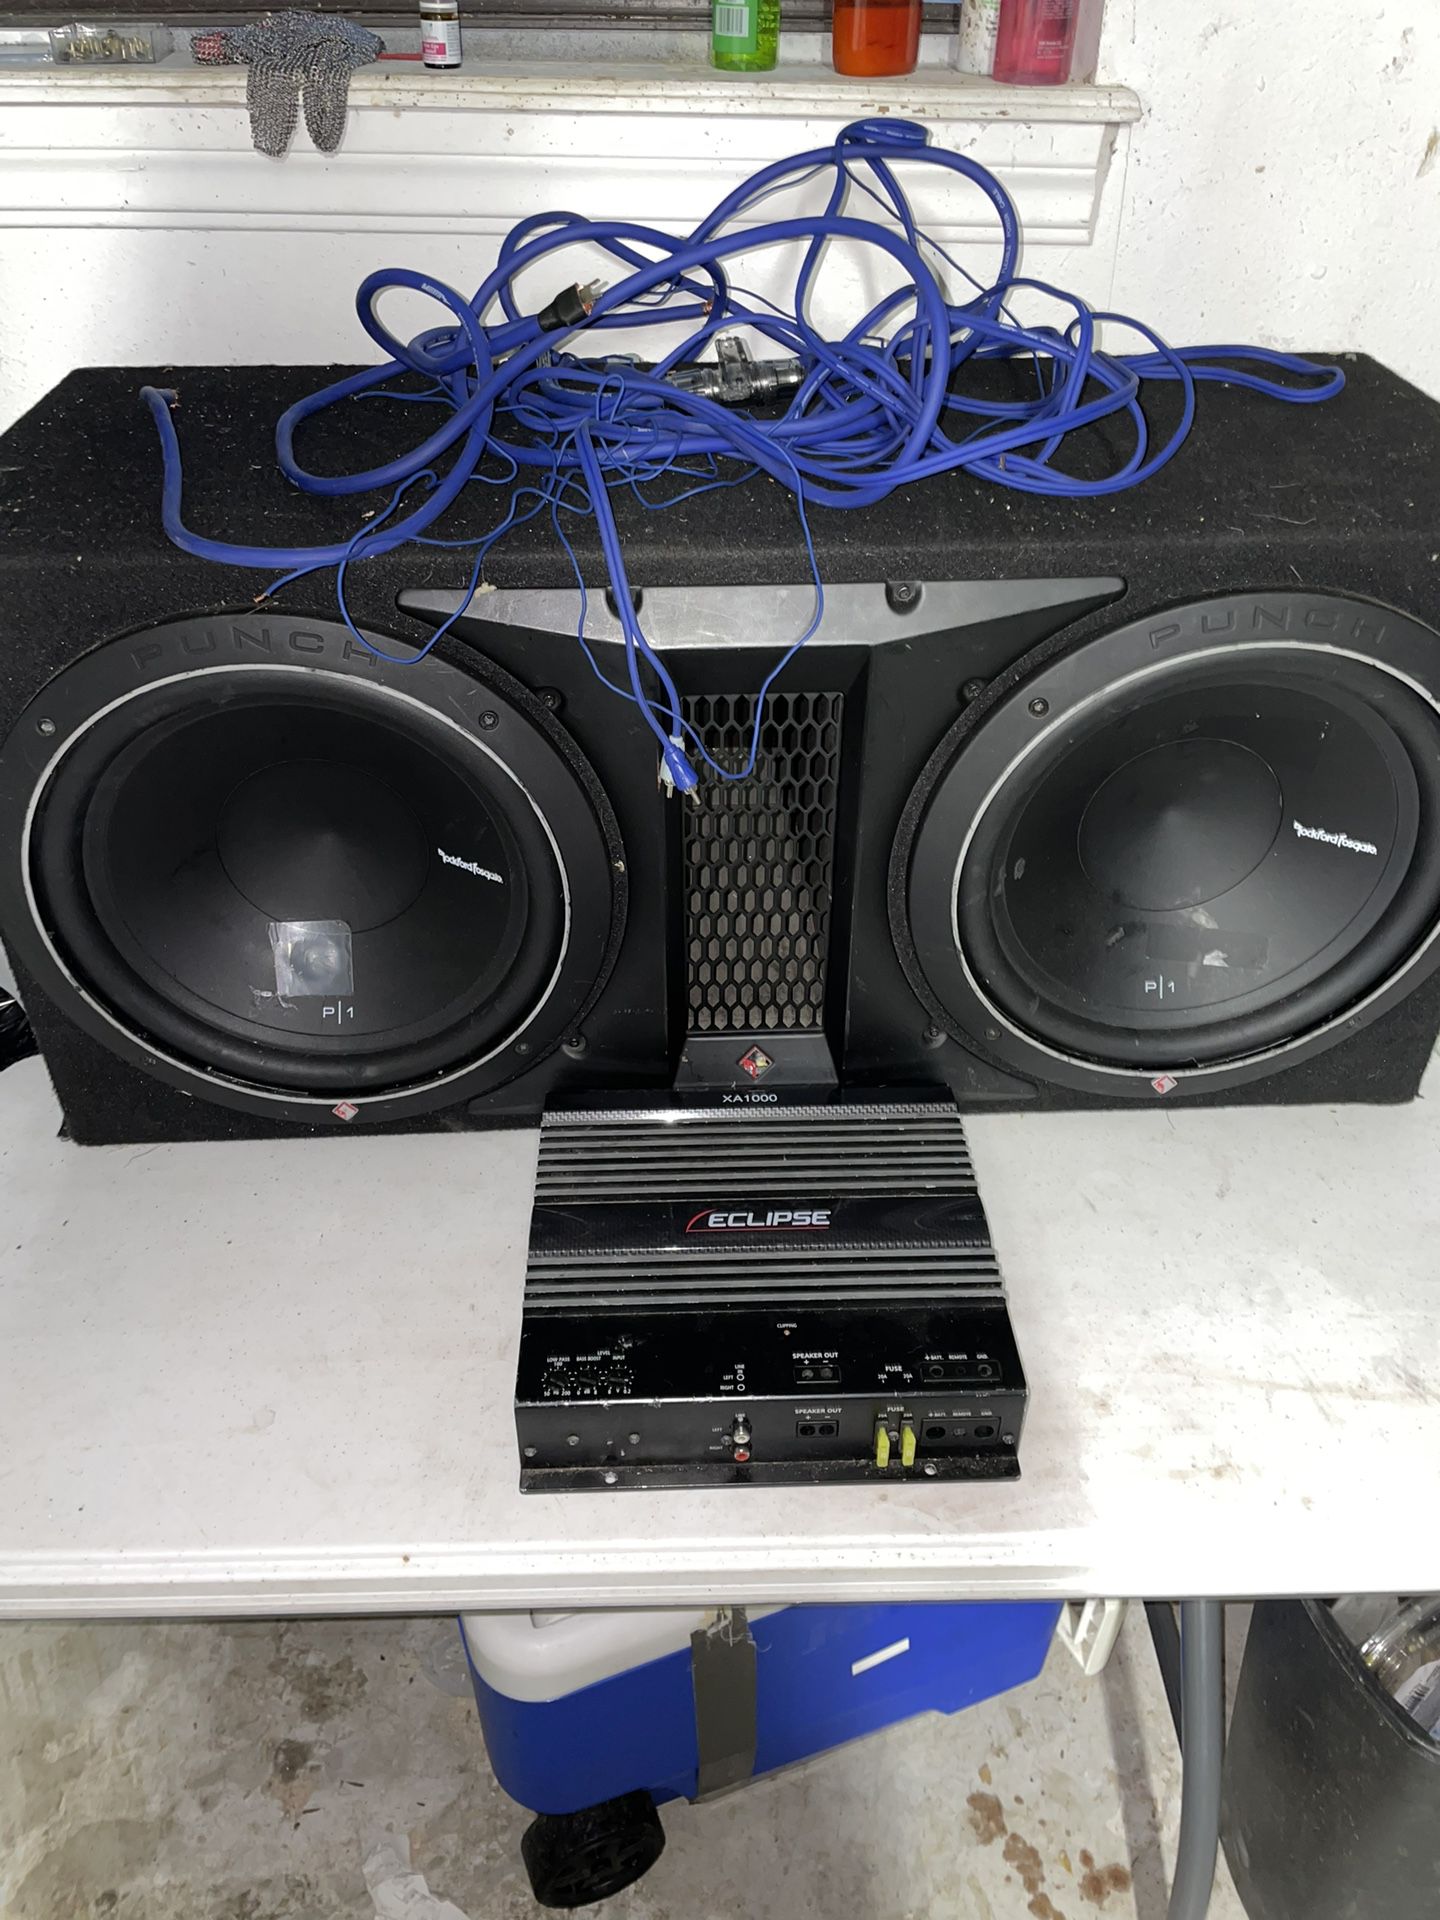 Subwoofer And Amp